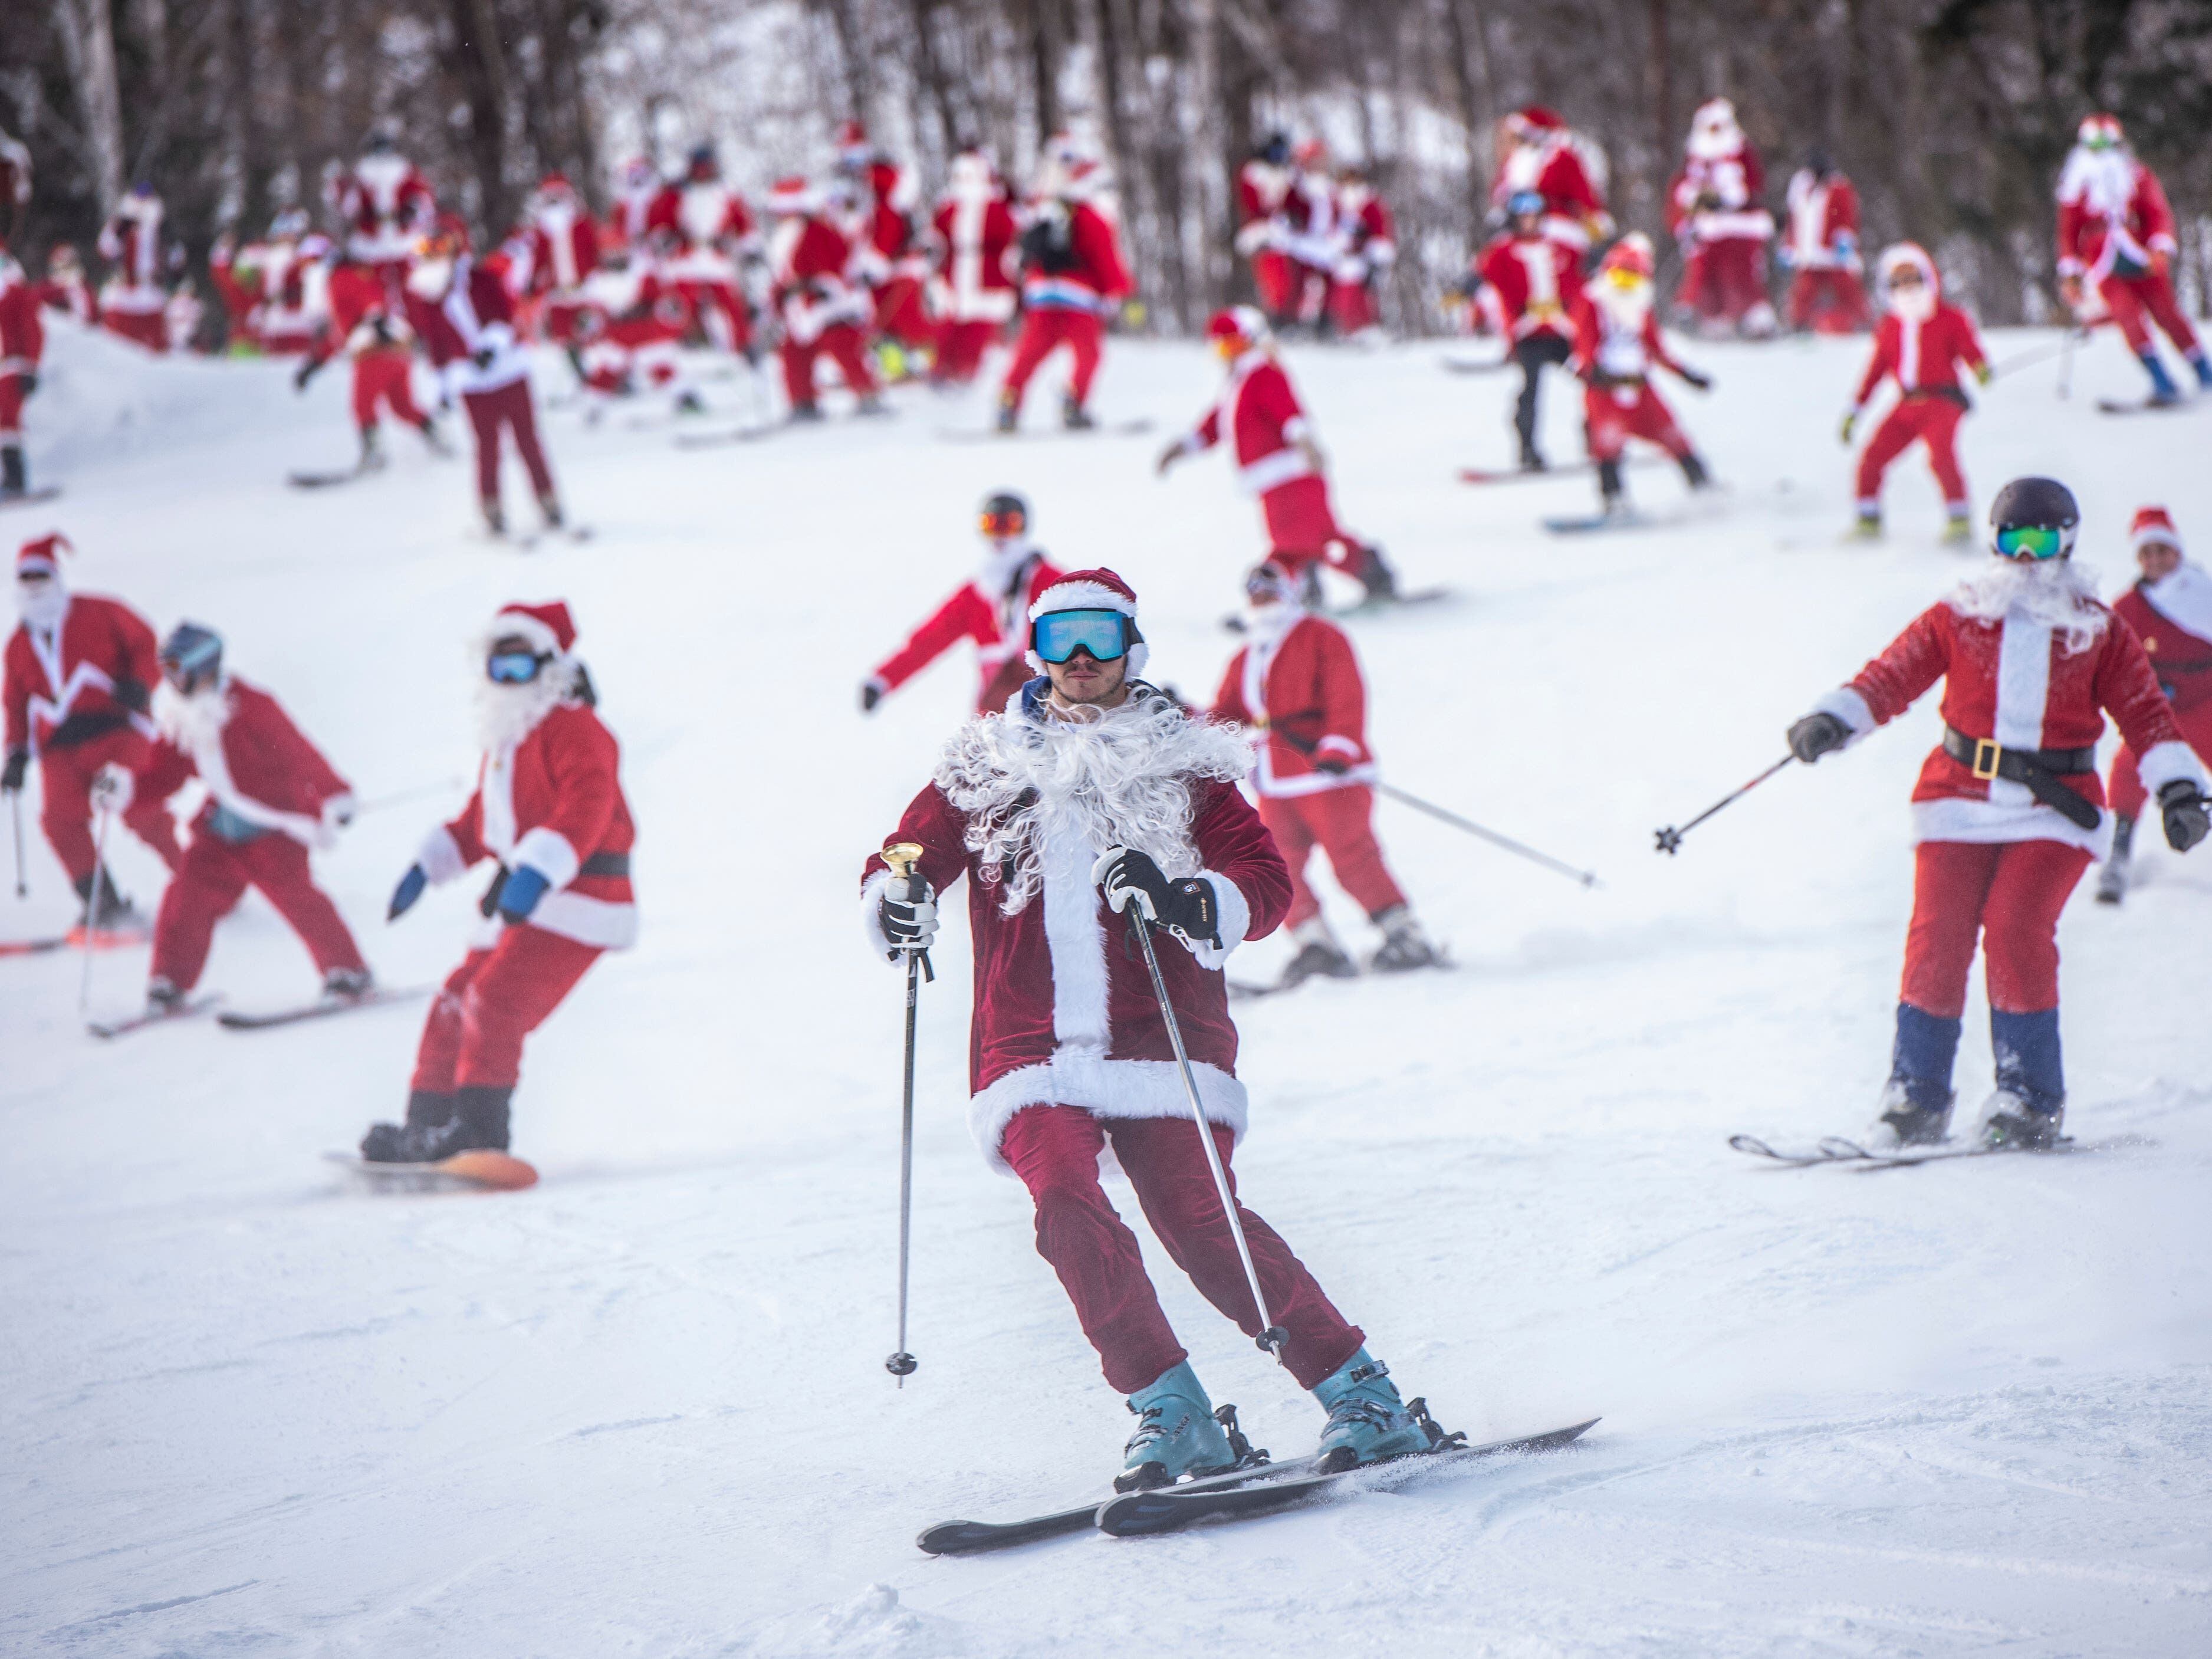 Skiing and snowboarding Santas take to the slopes for charity